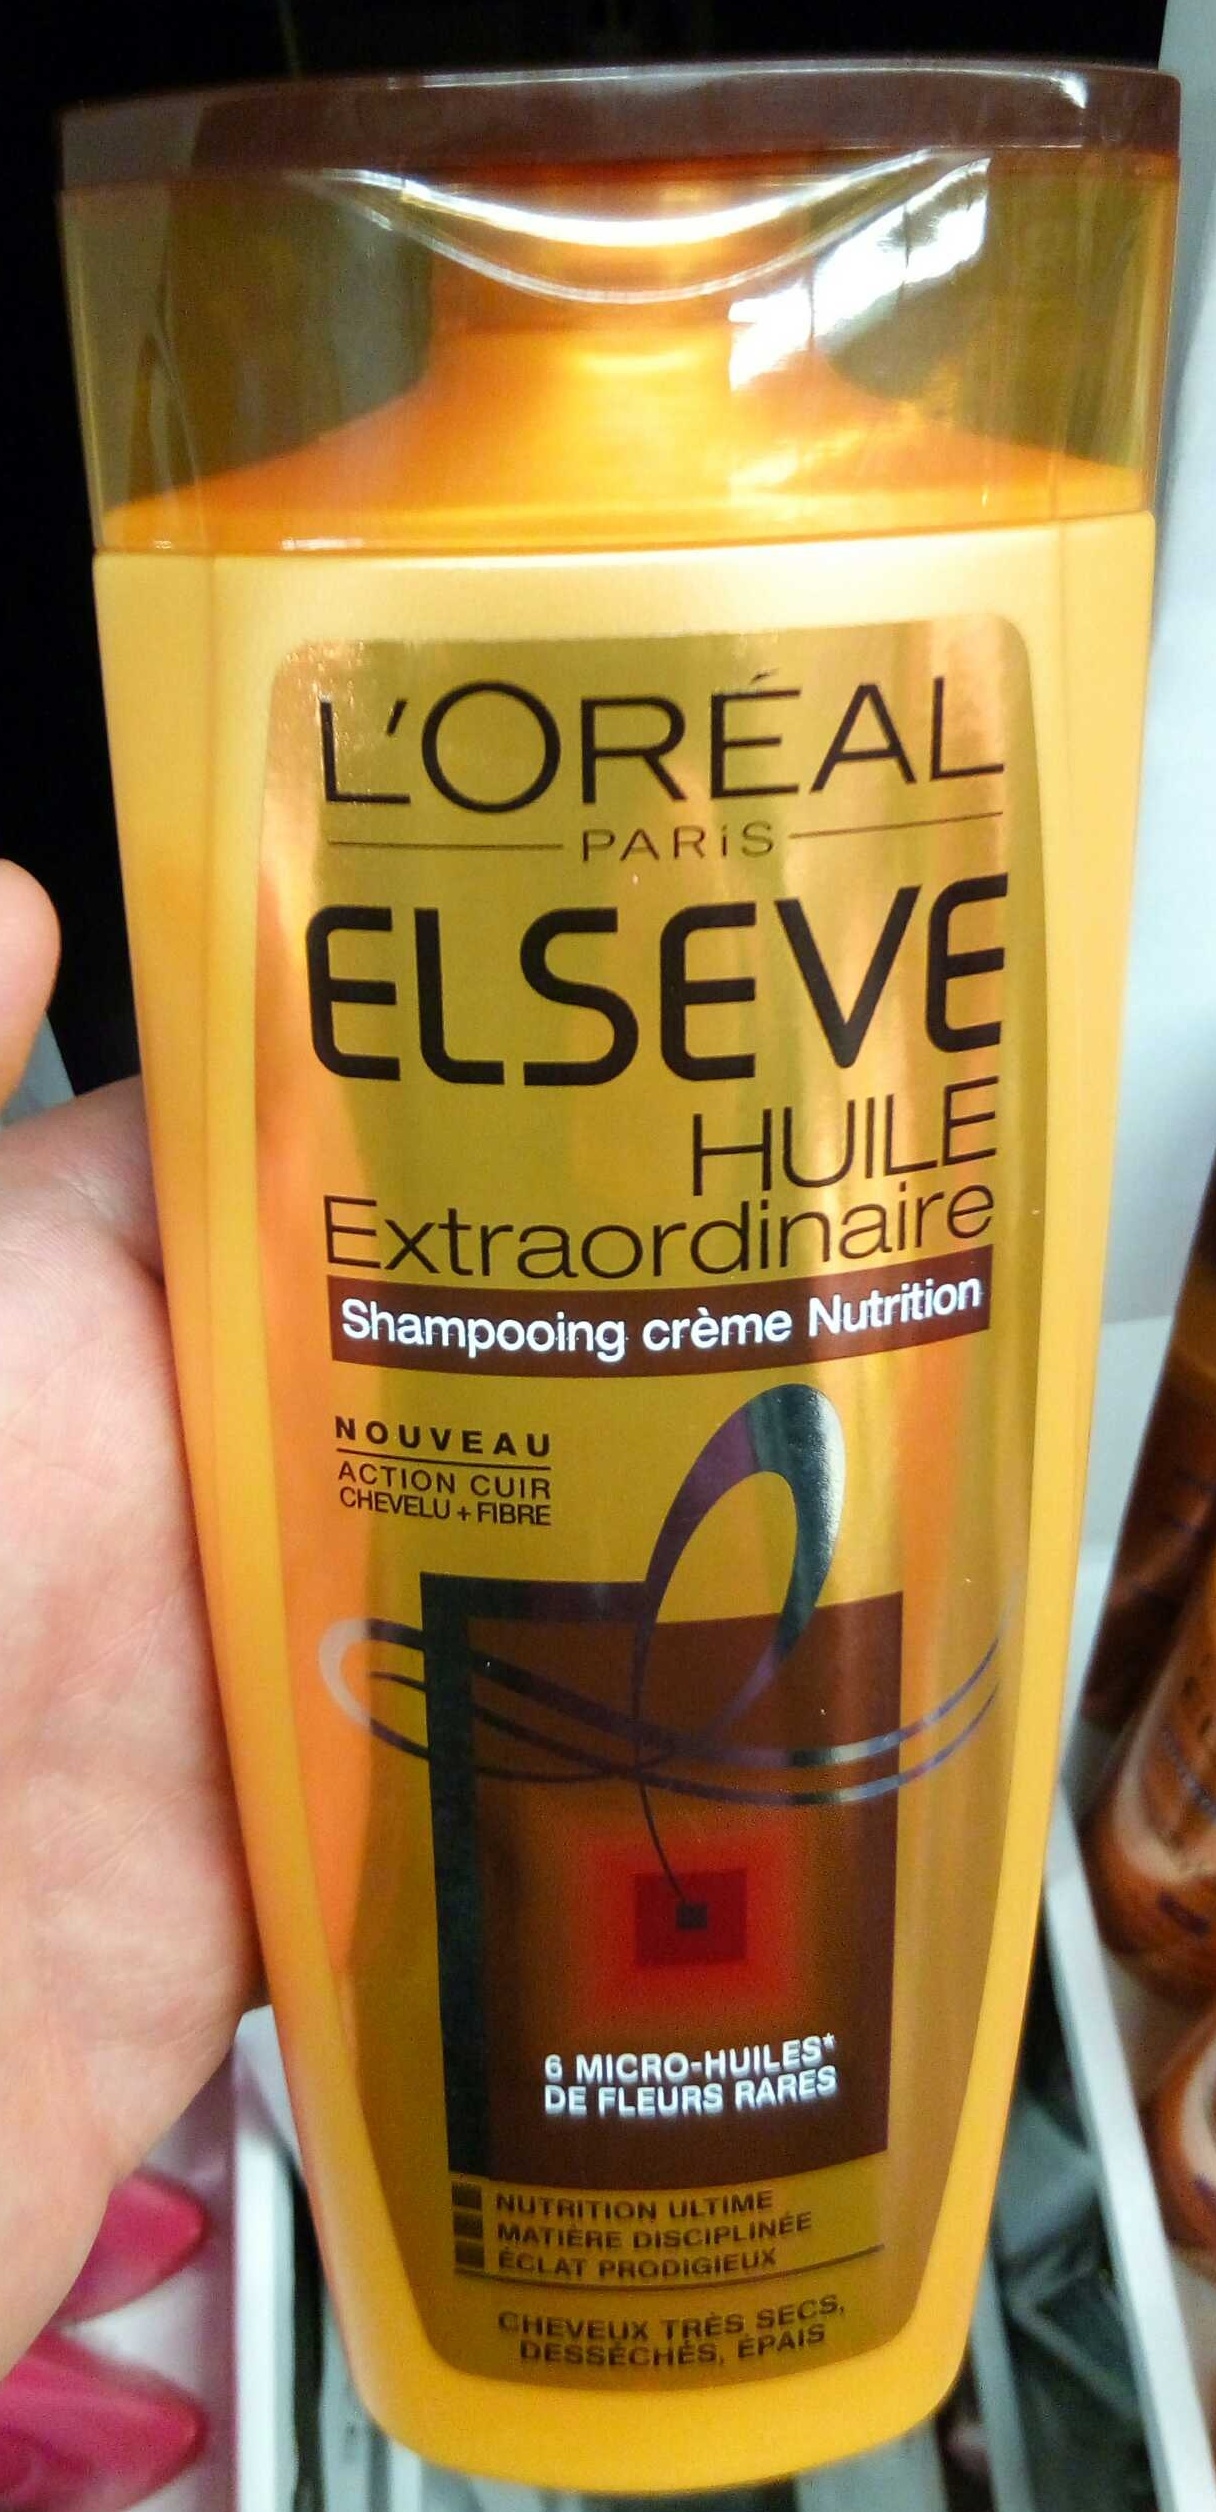 Elseve Huile Extraordinaire Shampooing crème nutrition - Tuote - fr